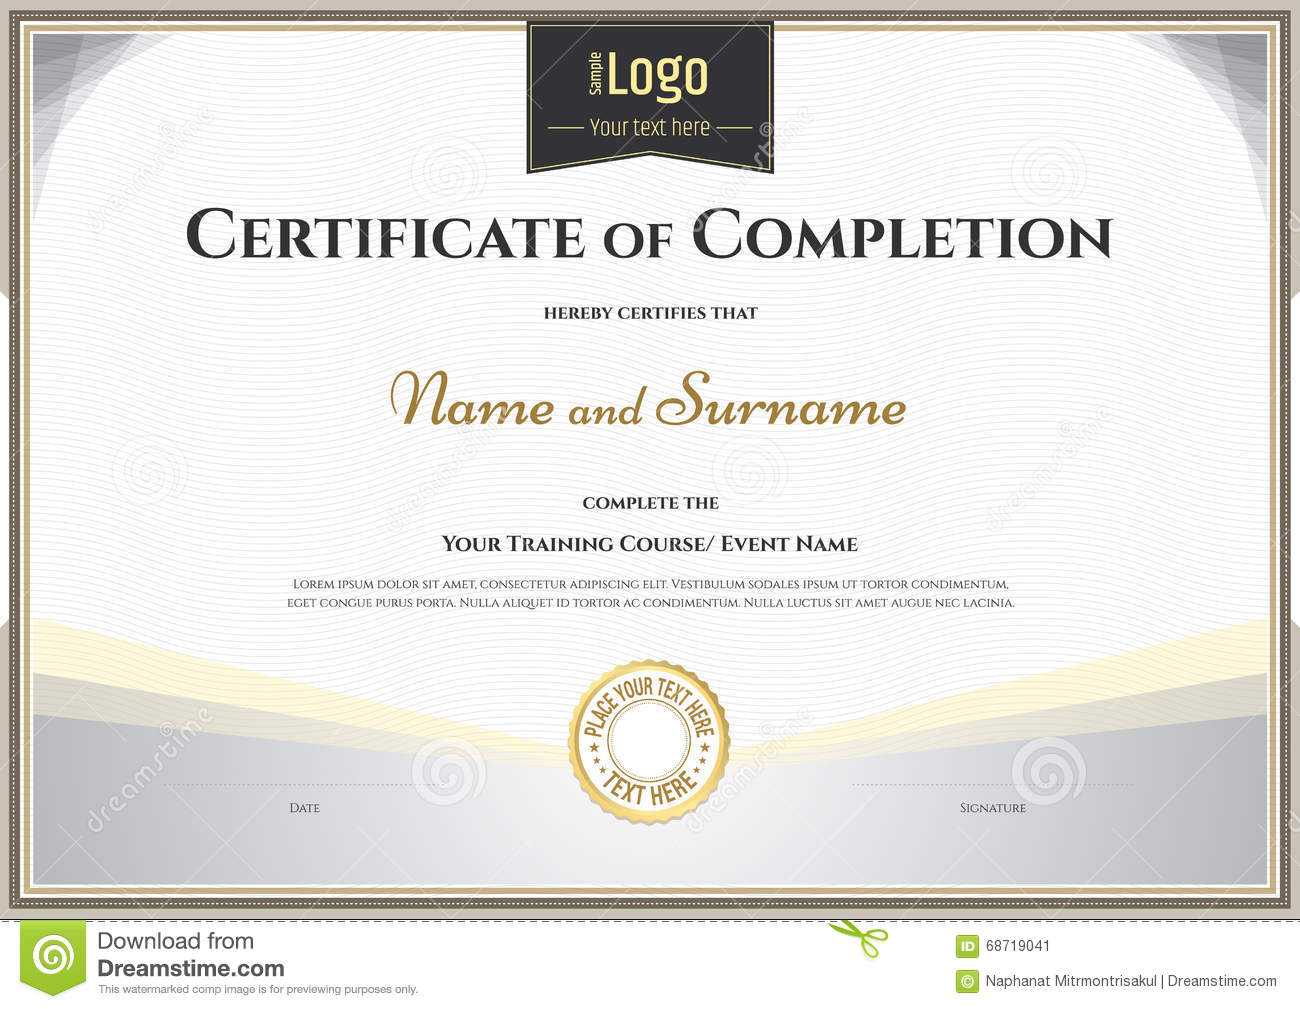 Certificate Of Completion Template In Vector For Achievement Pertaining To Certification Of Completion Template